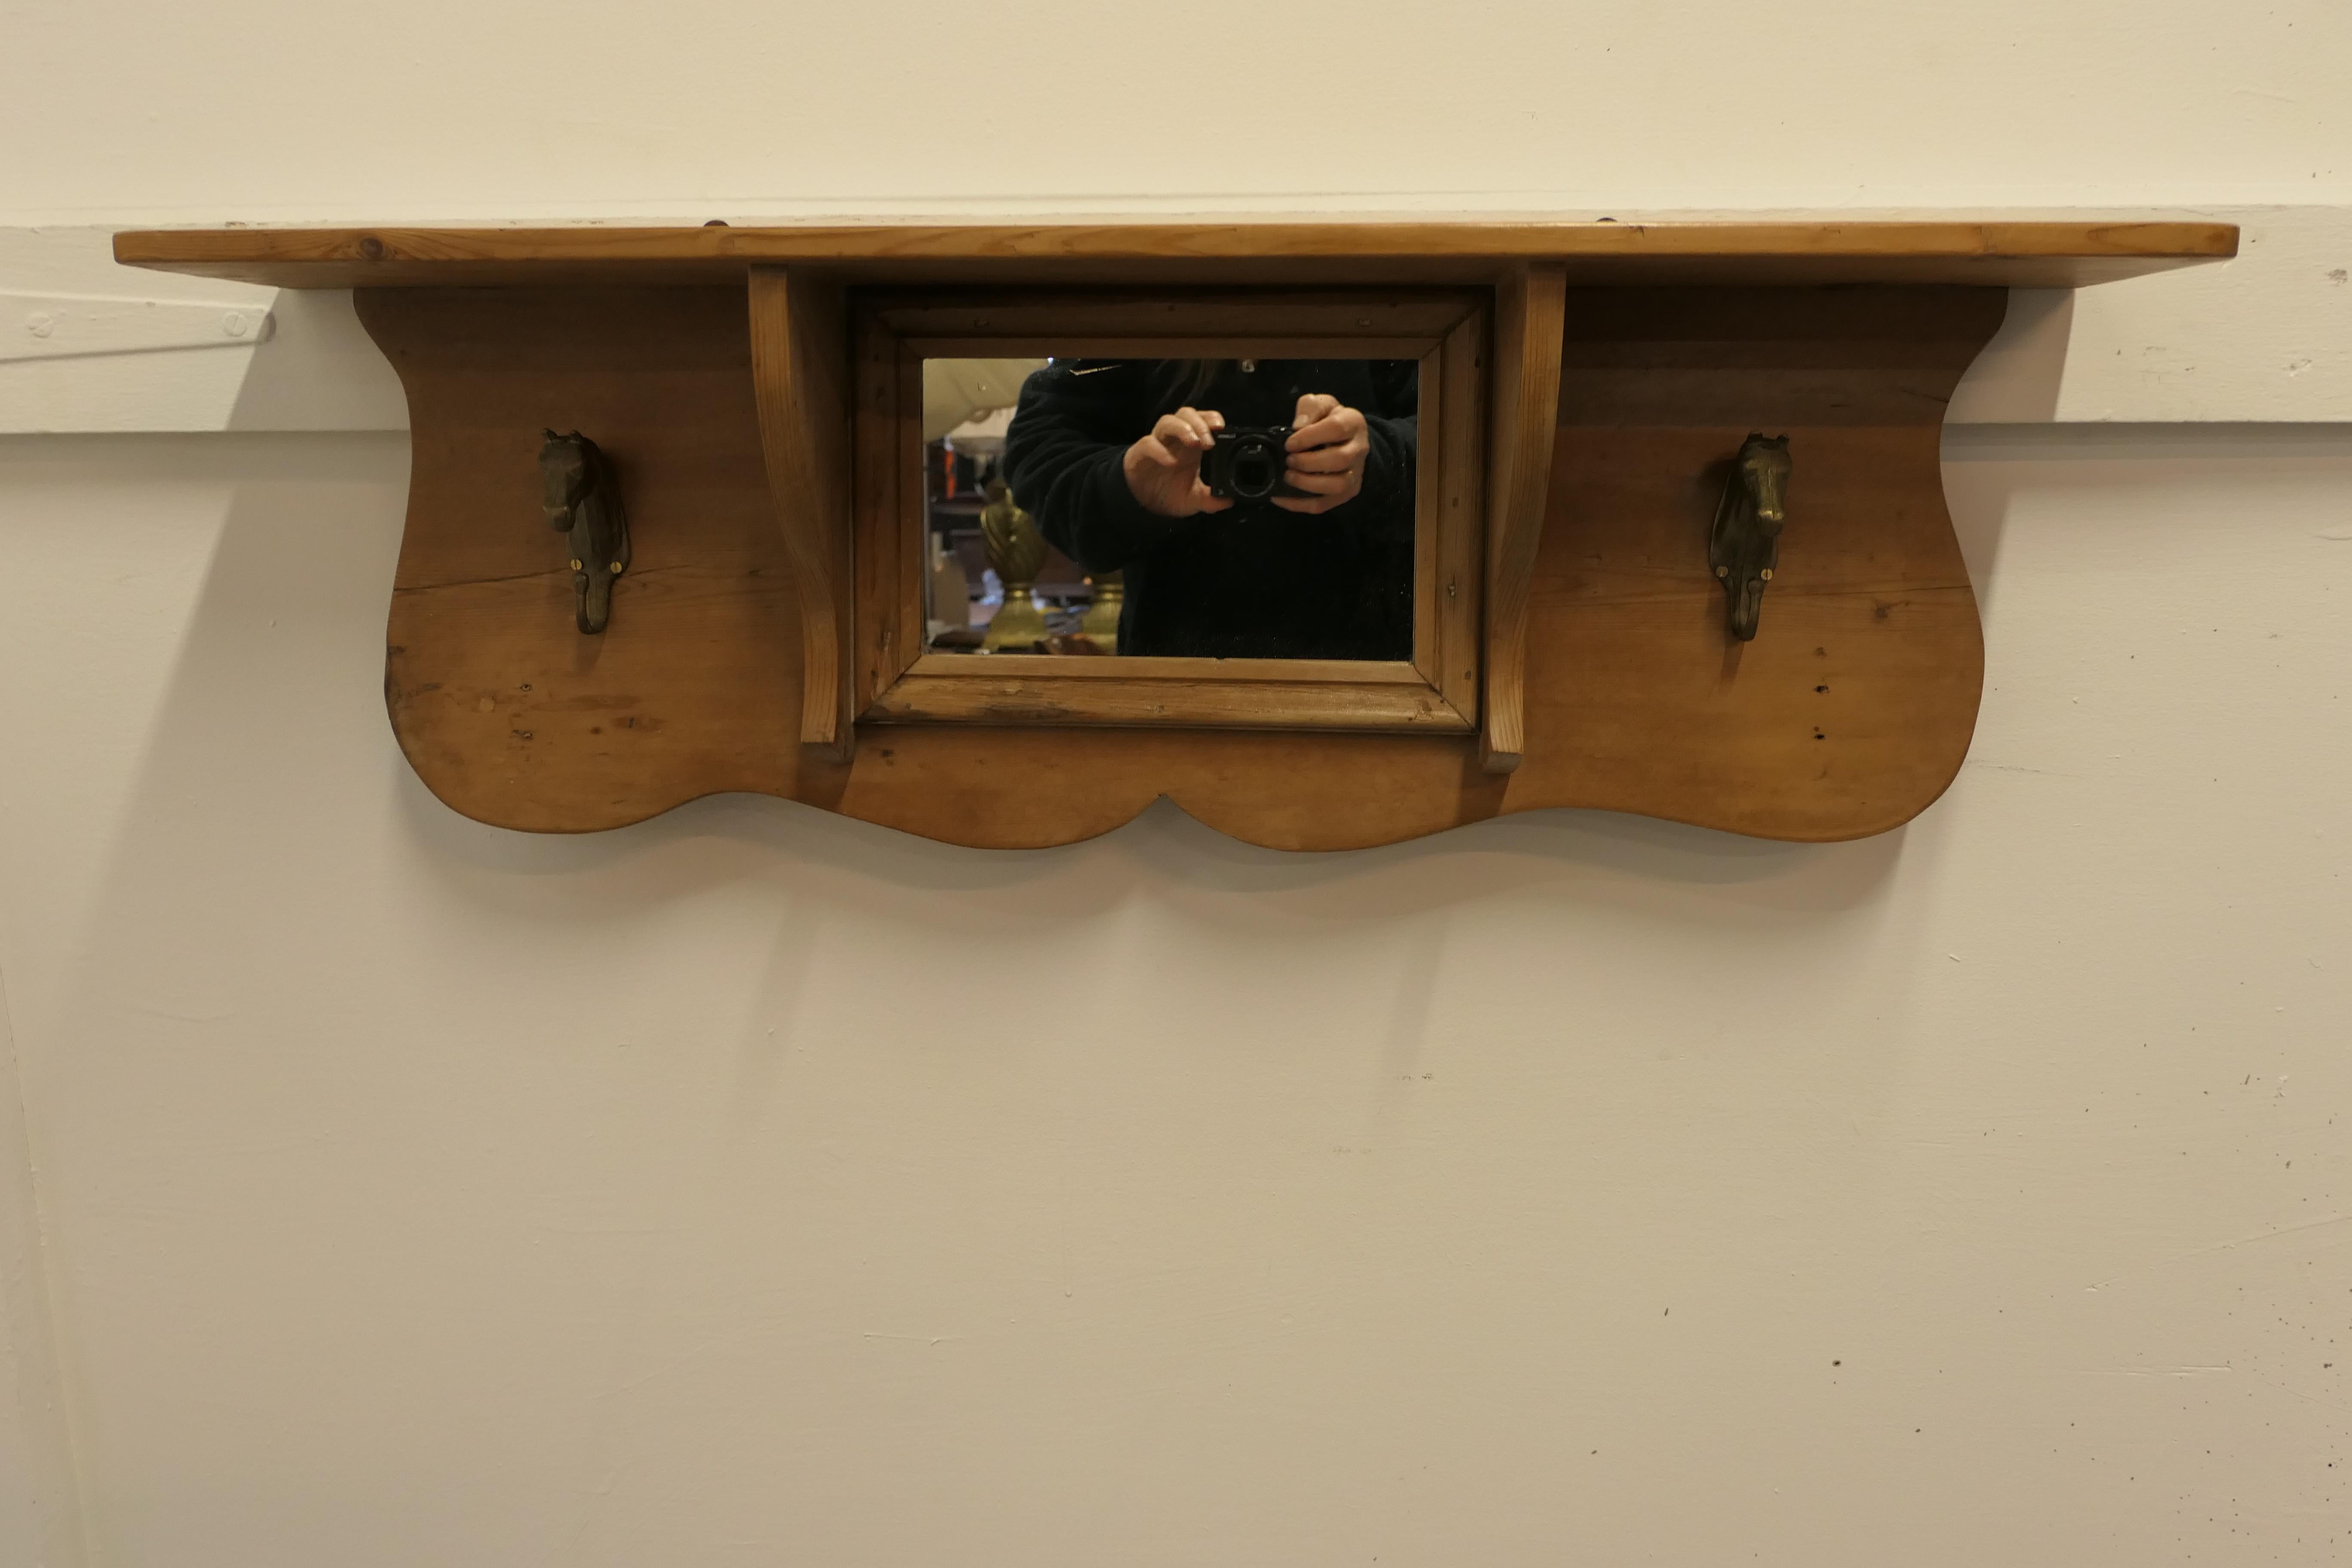 Arts and Crafts pine wall mirror with shelf and horse coat hooks.

This is a very attractive piece, which would work very well in a boot room or cloak room.
The mirror has a small shelf along the top, below this there is the mirror and a Horse